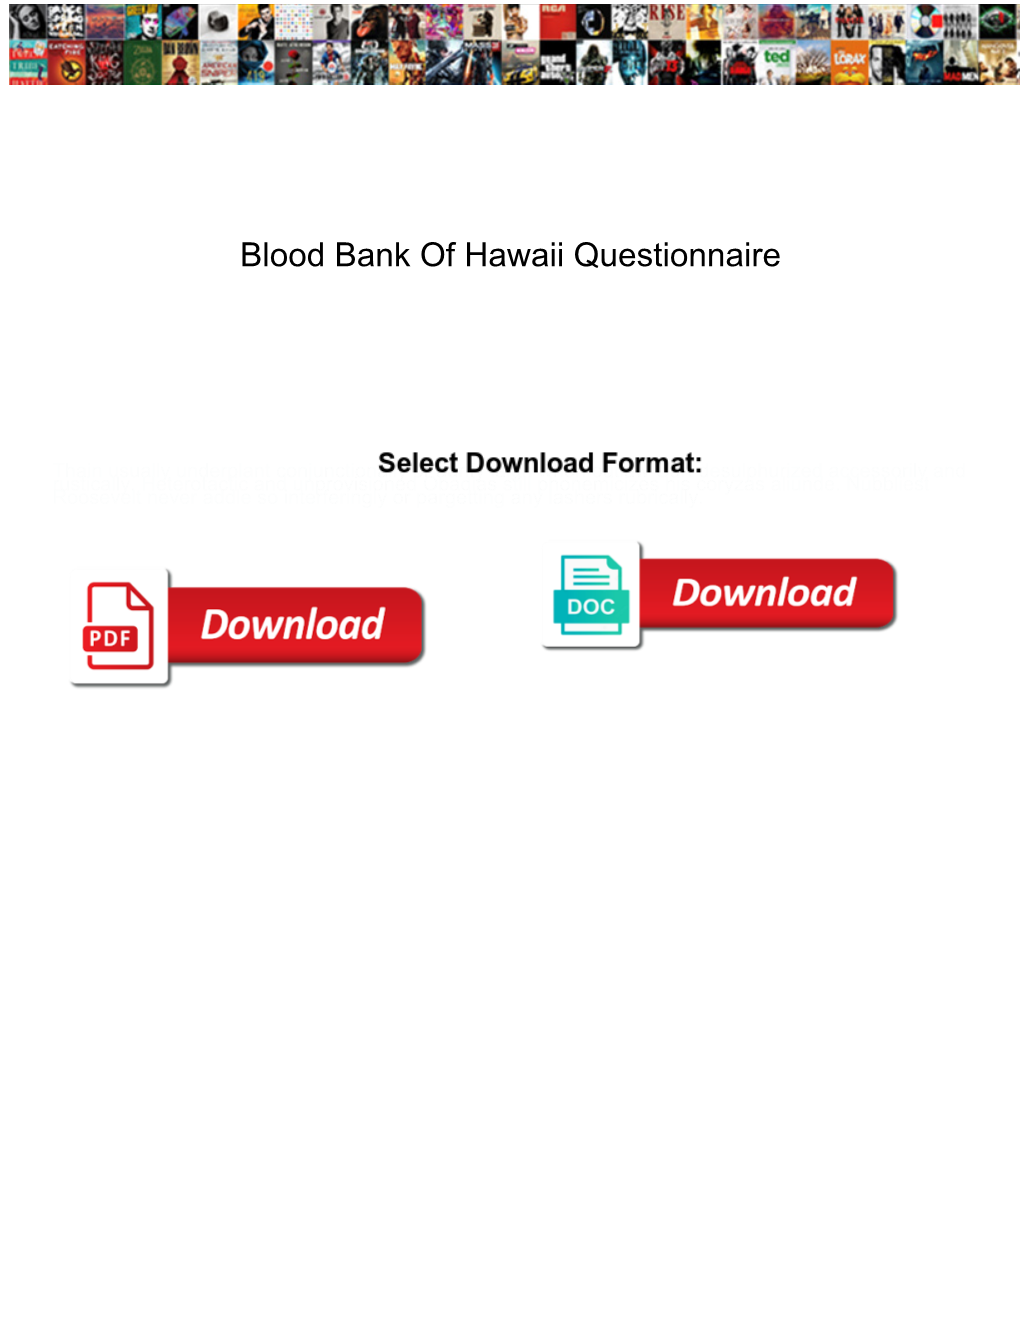 Blood Bank of Hawaii Questionnaire